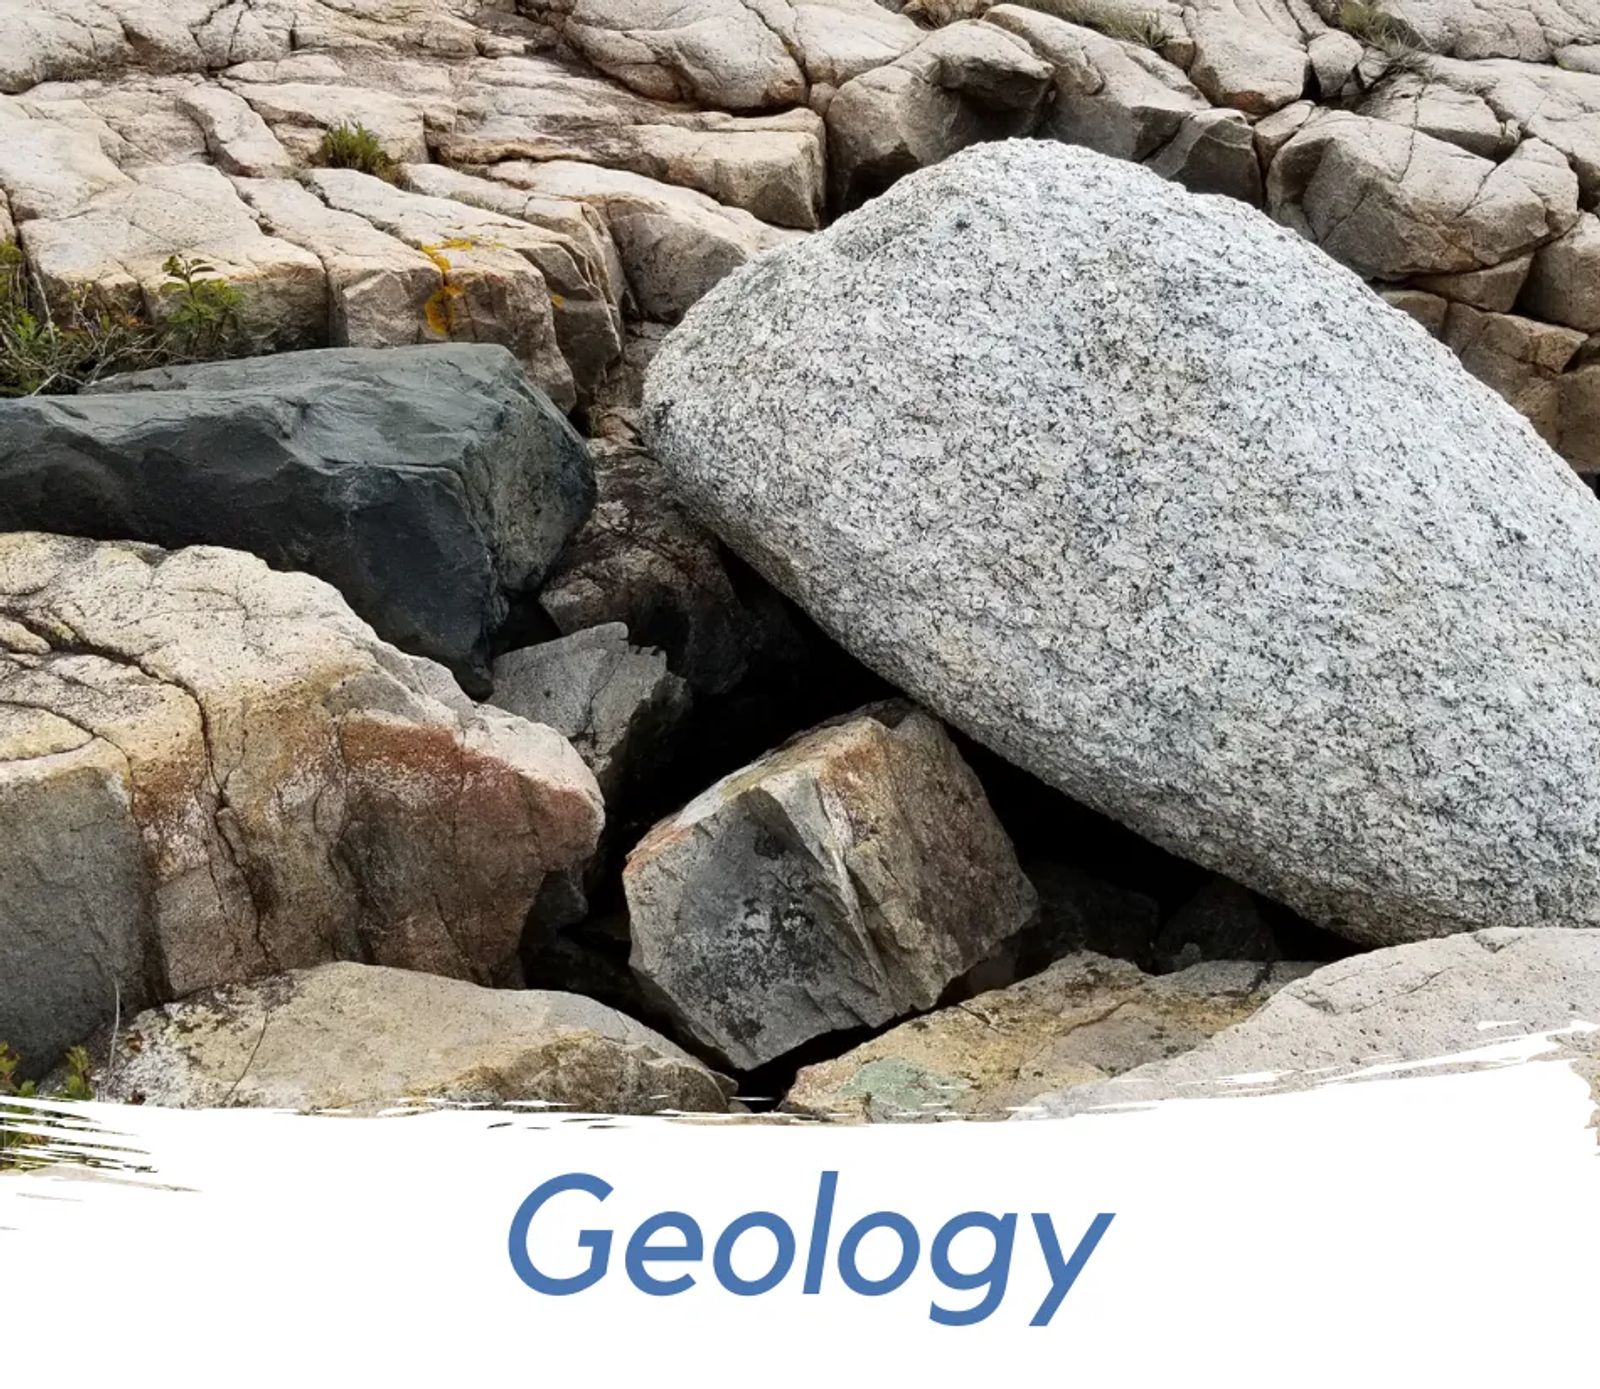 Photo of a glacial erratic surrounded by schoodic granite